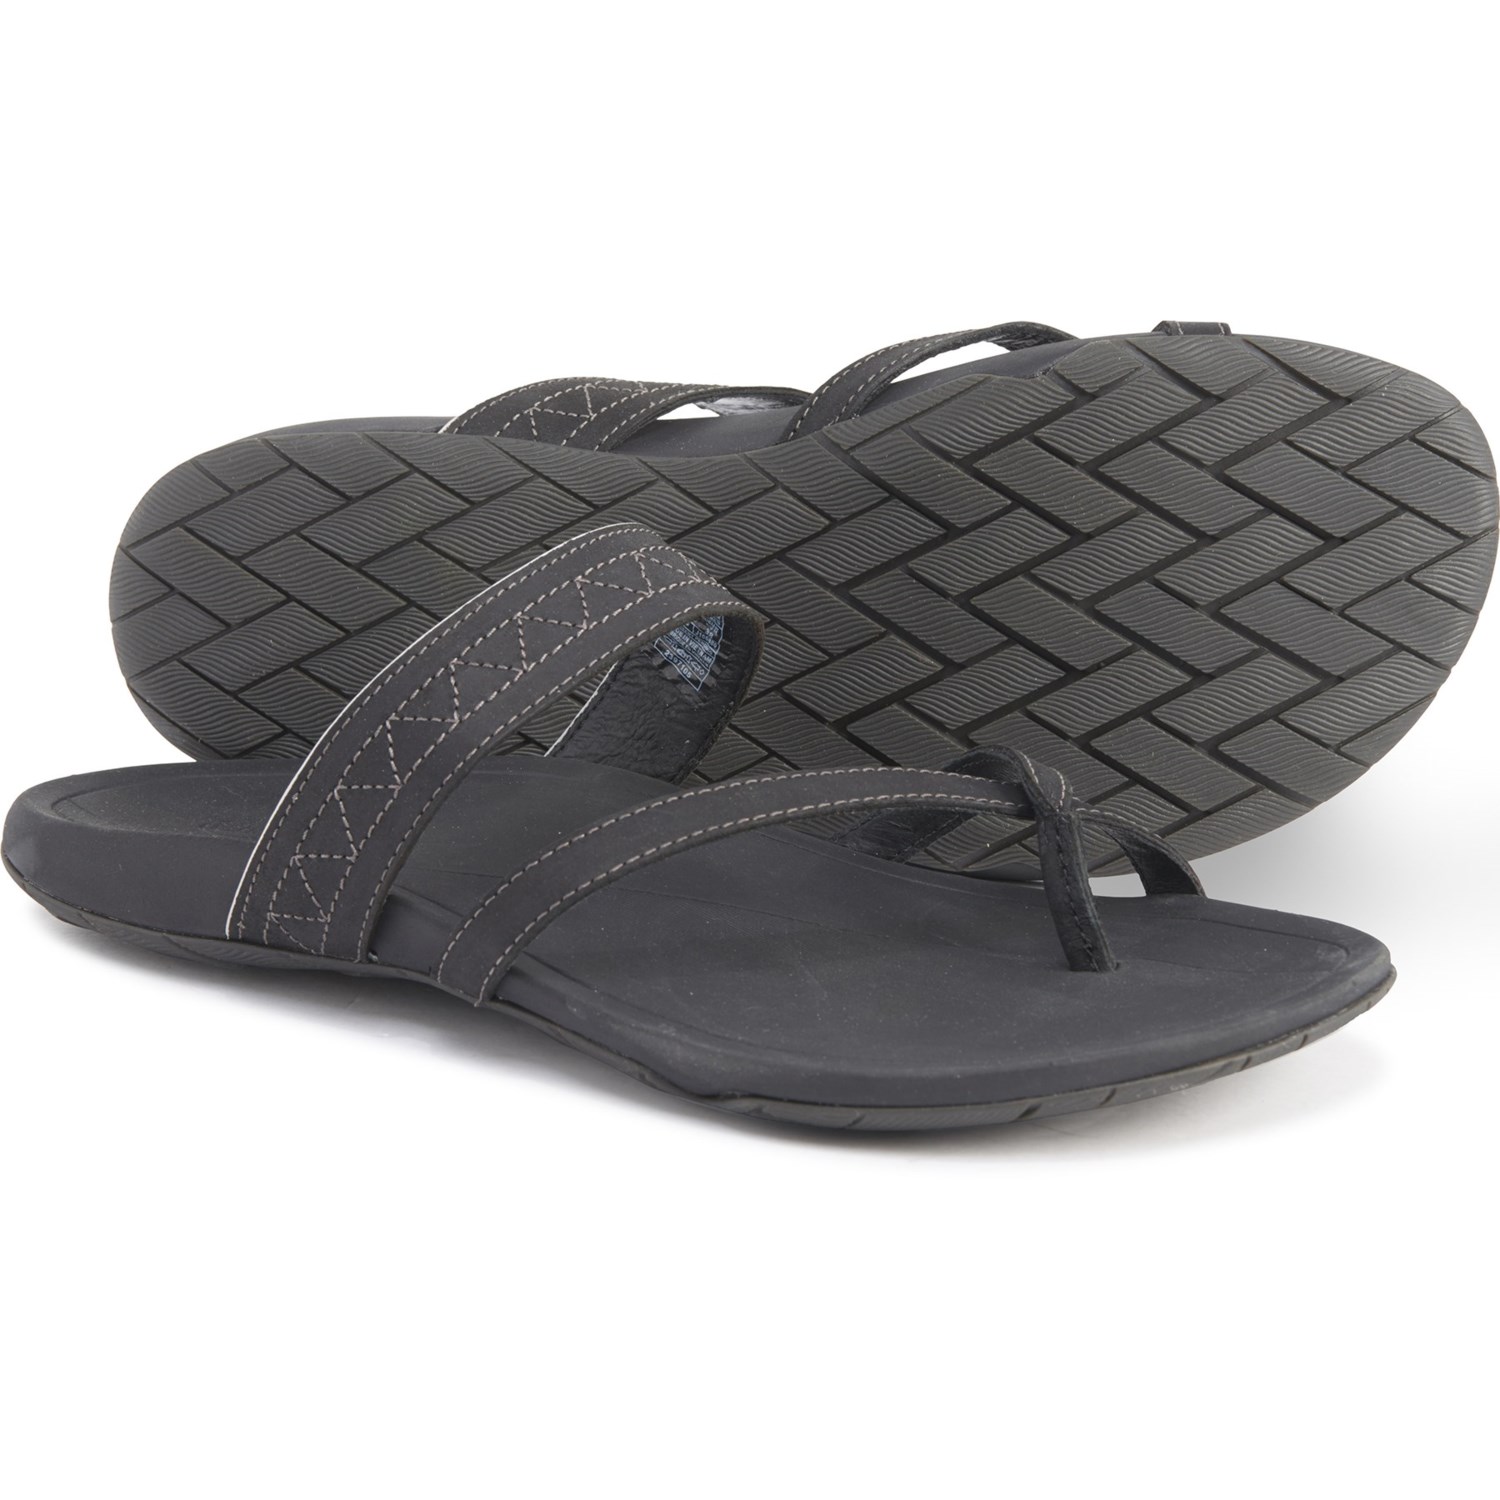 chaco flip flops clearance